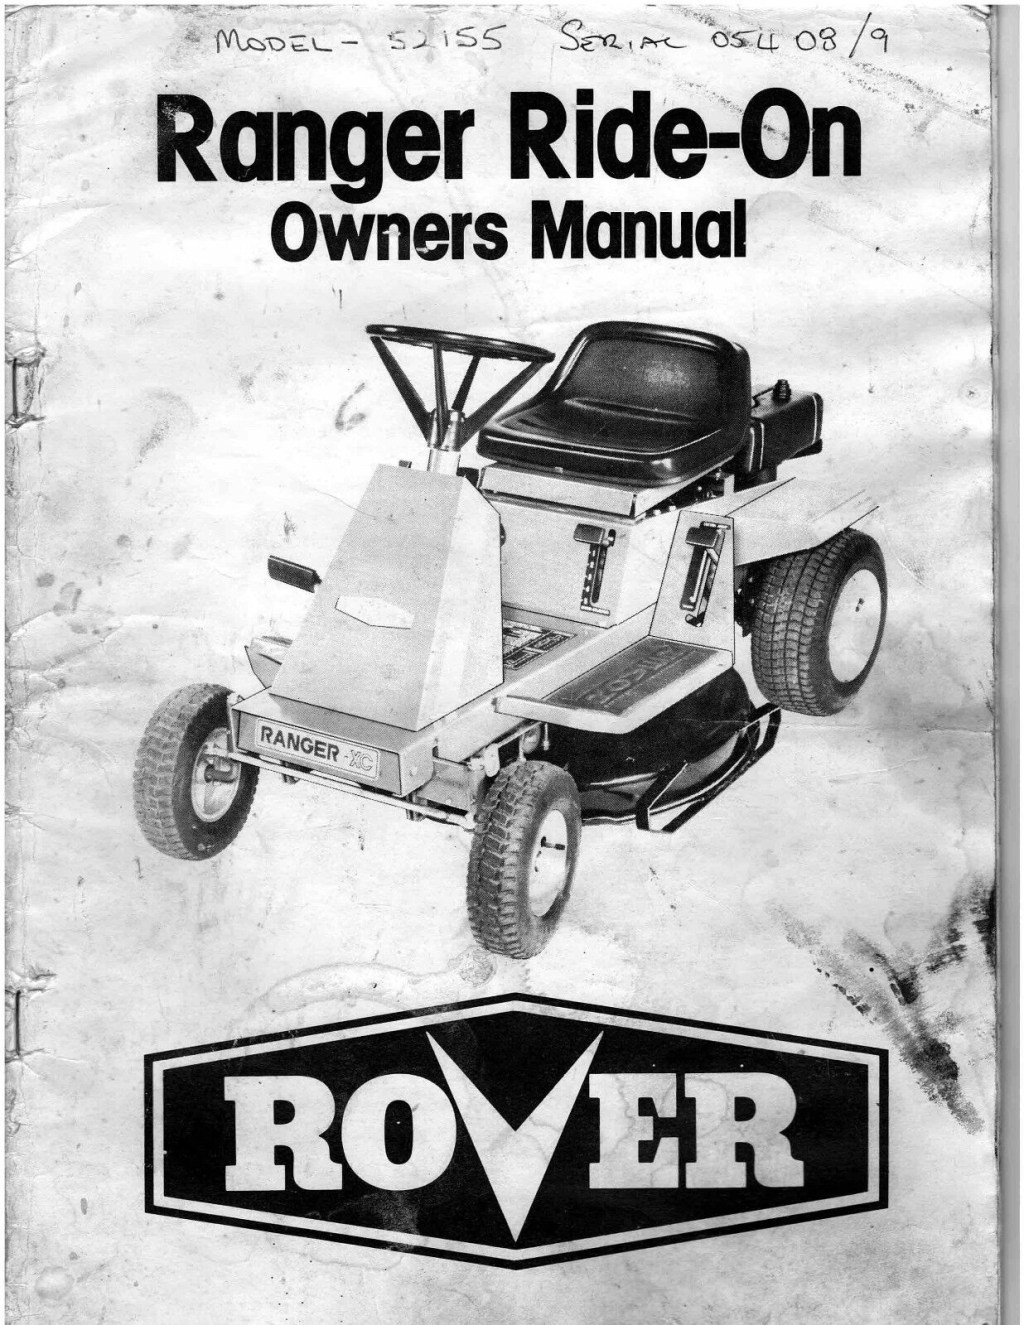 Picture of: Rover Ranger XC   Ride-on Mower  page Owners Manual CD DISC  Posted